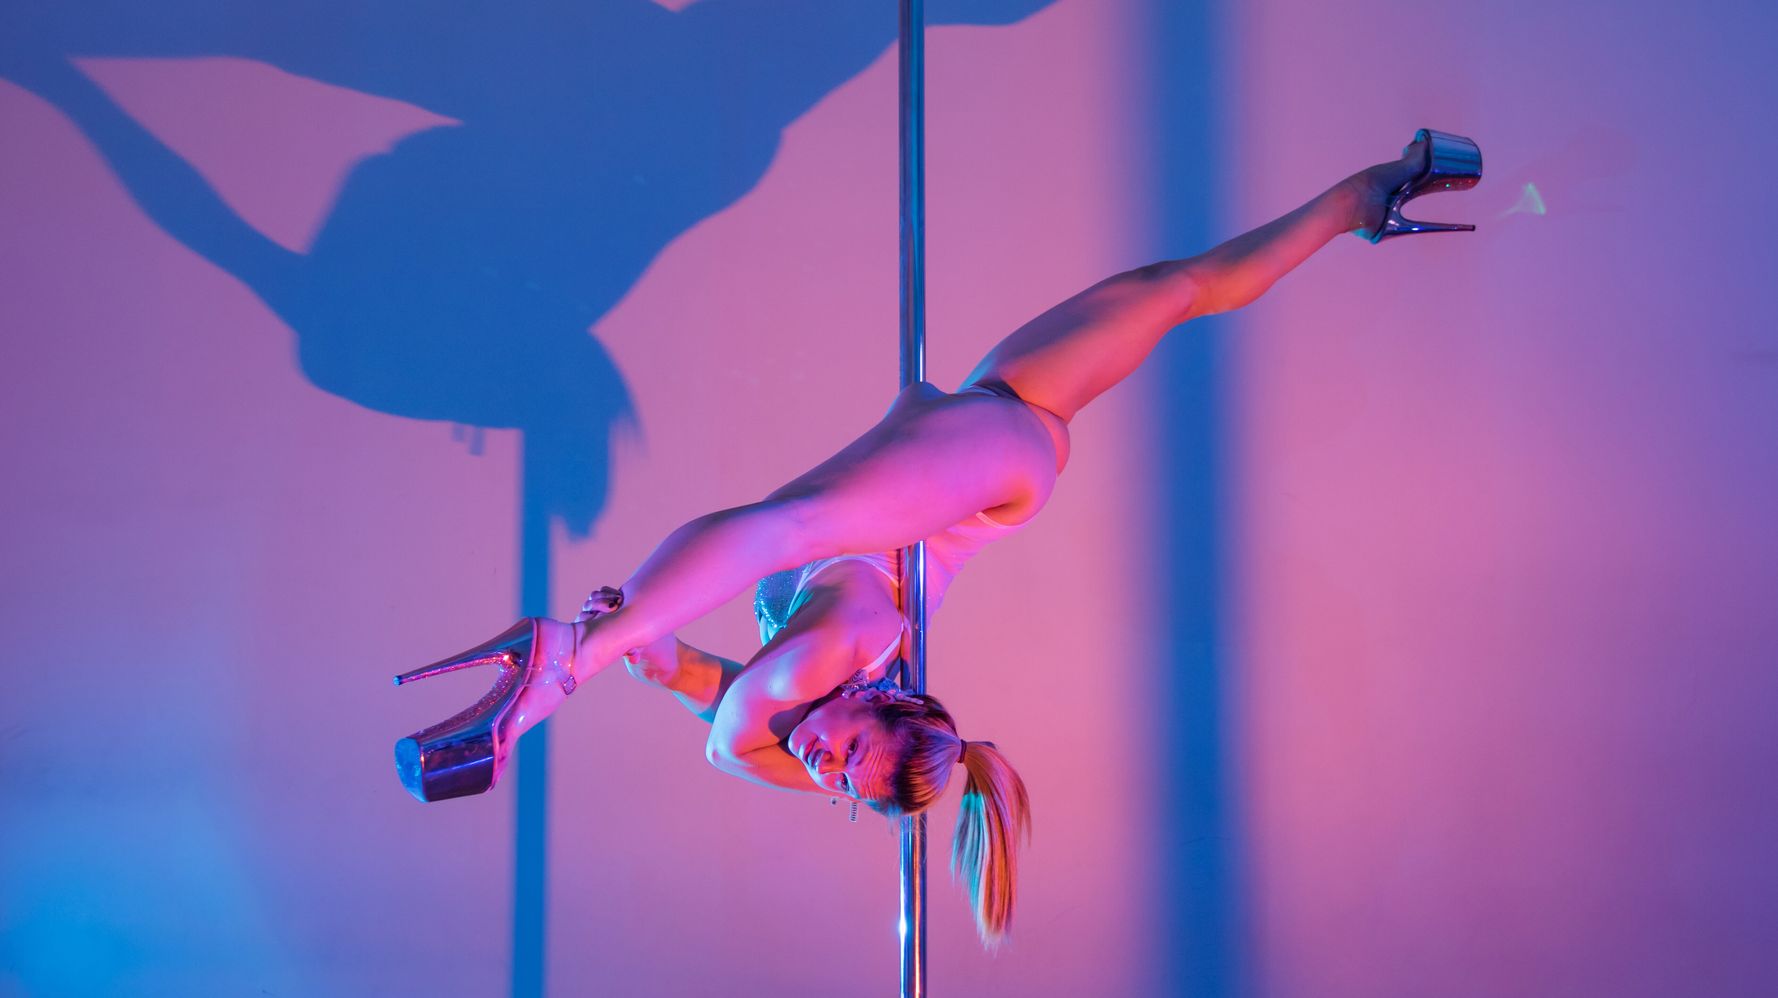 Japanese Pole Dance Porn - When I Was Outed For My Porn Past, Pole Dancing Helped Me Heal | HuffPost